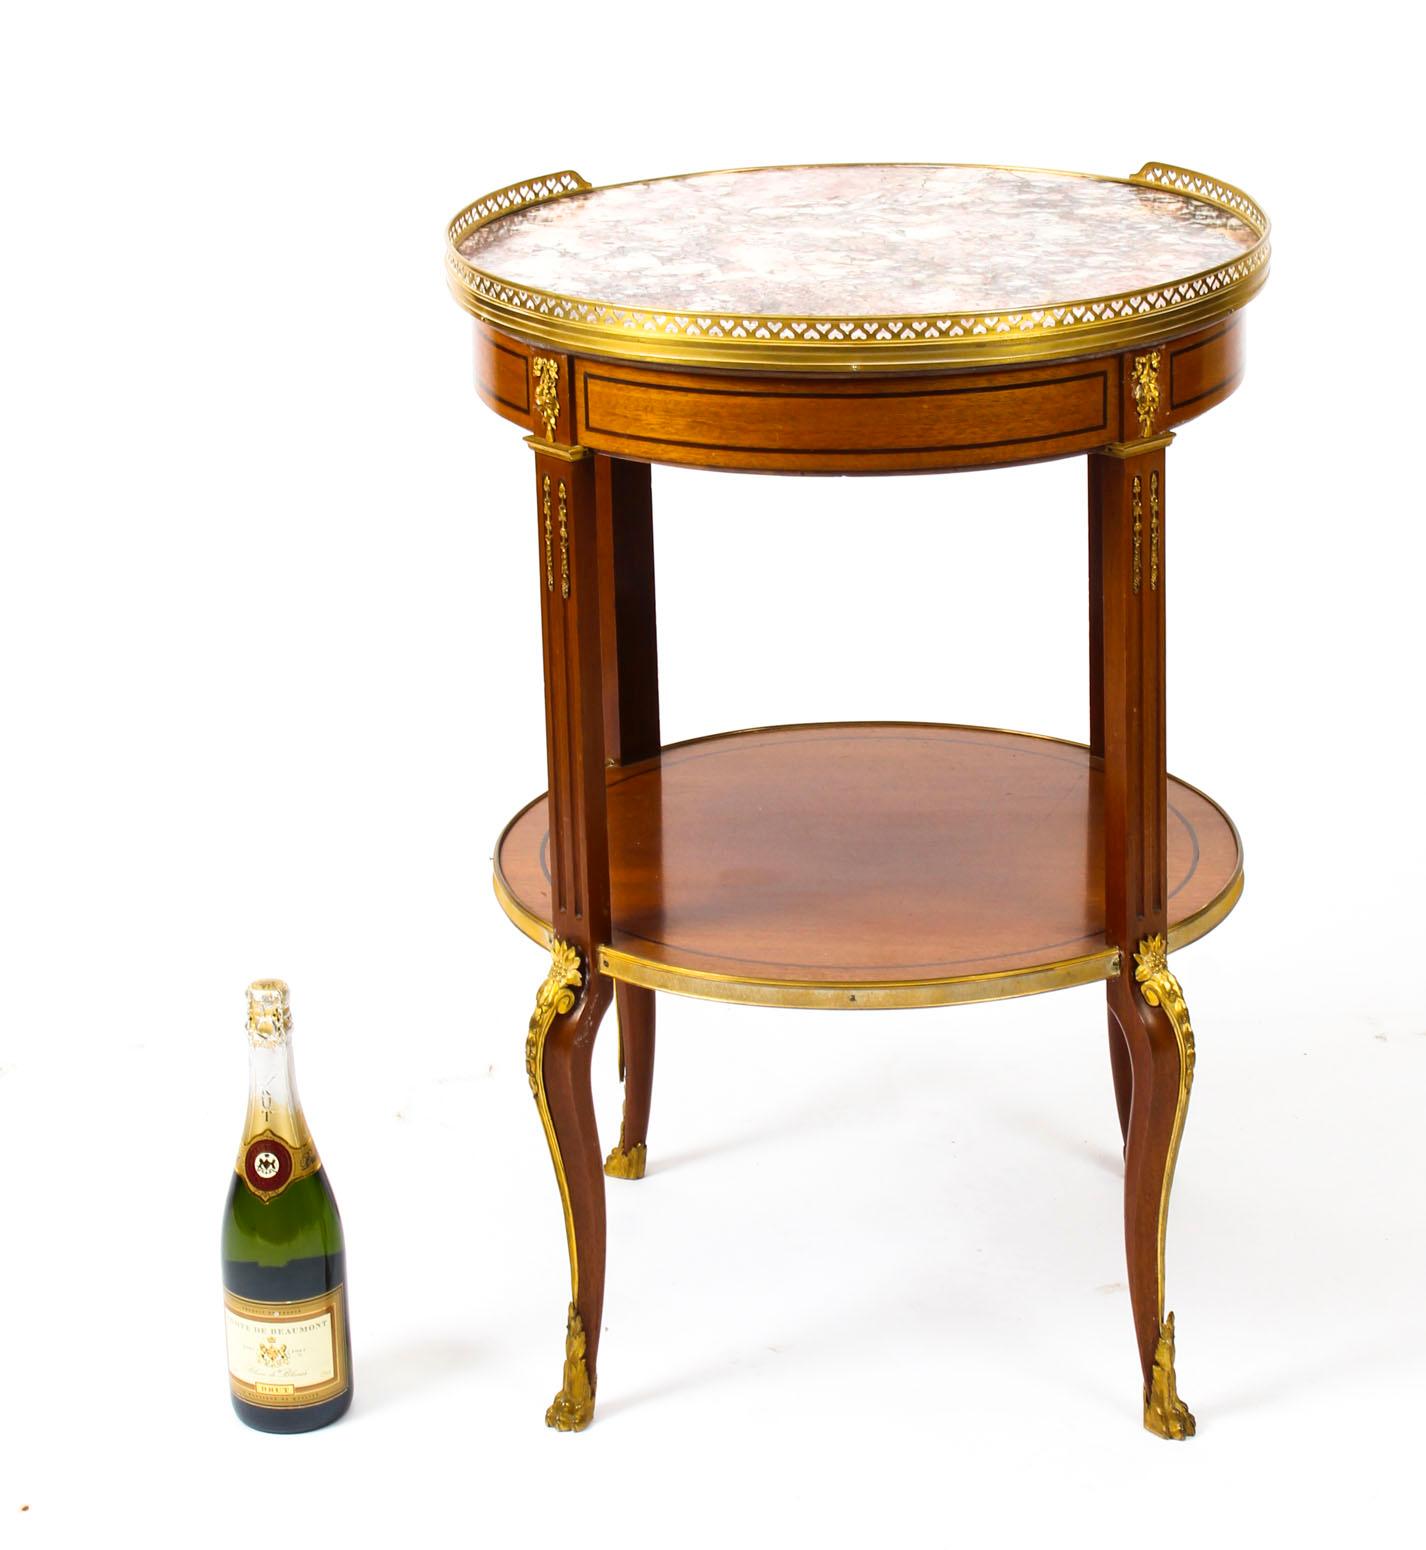 Antique French Louis Revival Marble and Ormolu Occasional Table, 19th Century For Sale 8